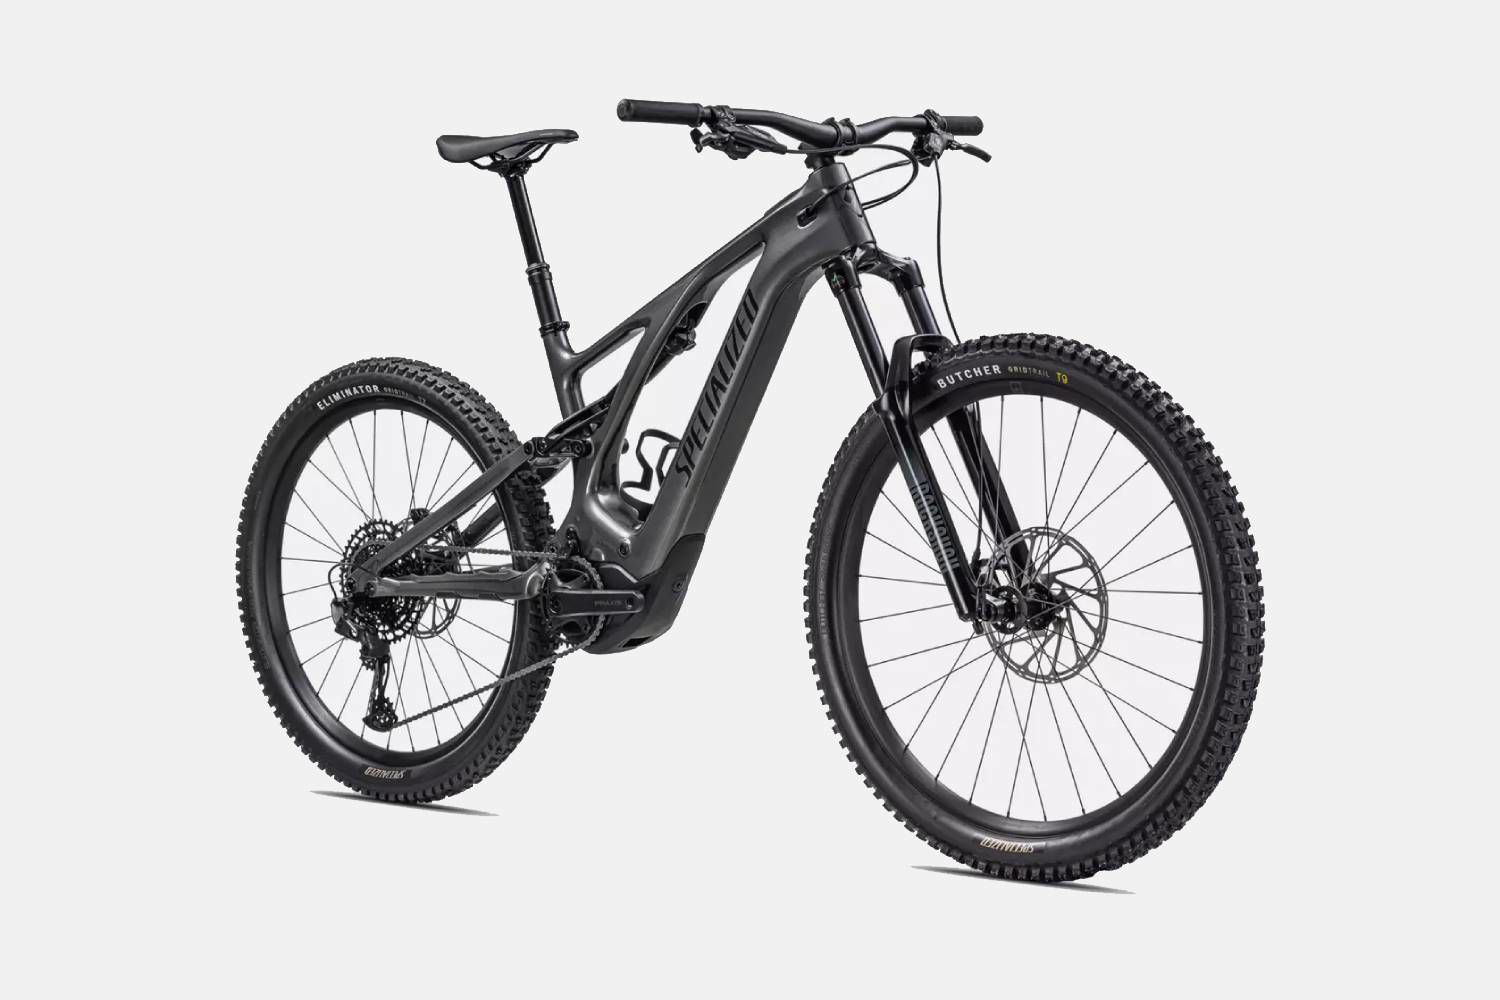 Picture of SPECIALIZED Turbo Levo Carbon Smoke Black